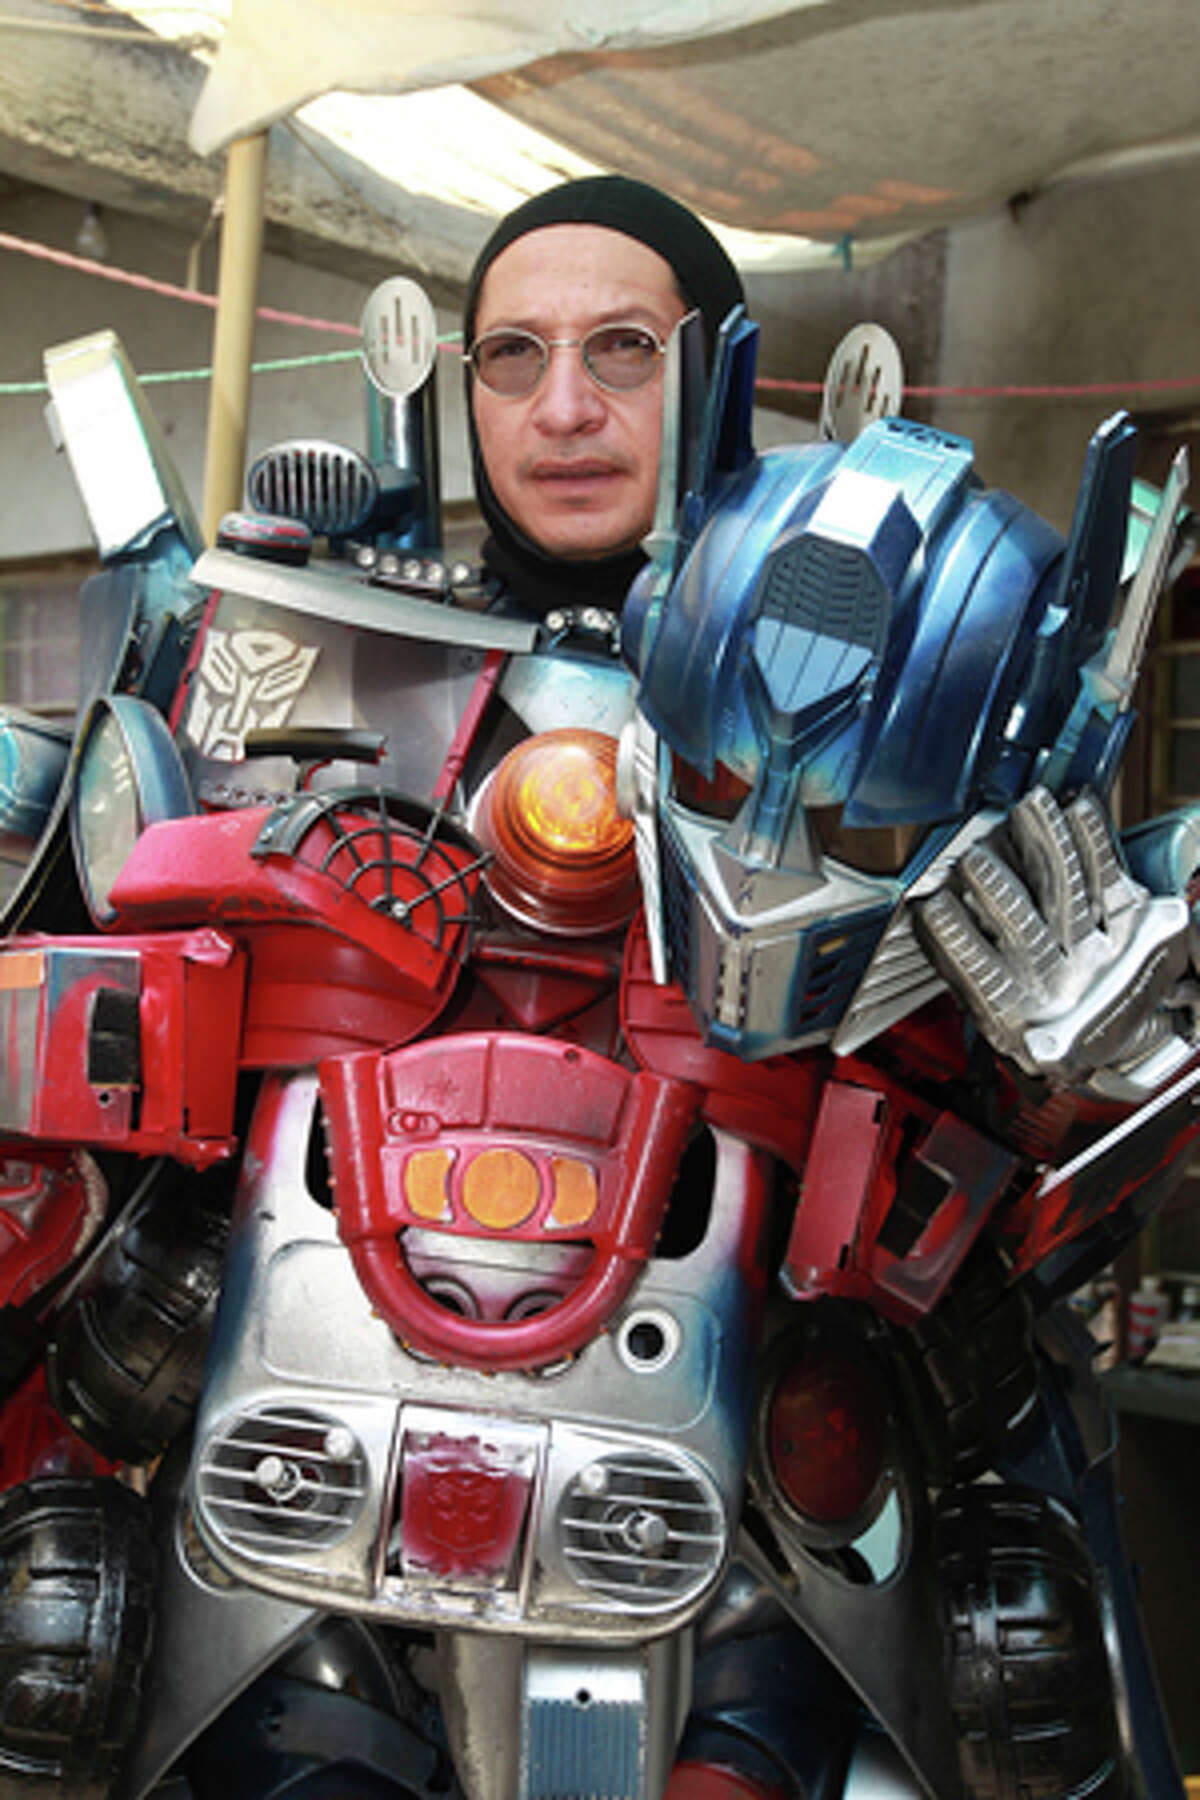 Jose Luis Mendez Luna, 38, poses wearing his Optimus Prime Transformer costume at home in a working class neighborhood in Mexico City, Wednesday, June 8, 2011. Luna whose daytime job is a plumber, is, along with his wife, both avid cosplayer and cosmakers, a type of performance art in which participants don and make costumes and accessories to represent a specific character. Their characters of choice are the Transformers and the Star Wars characters.